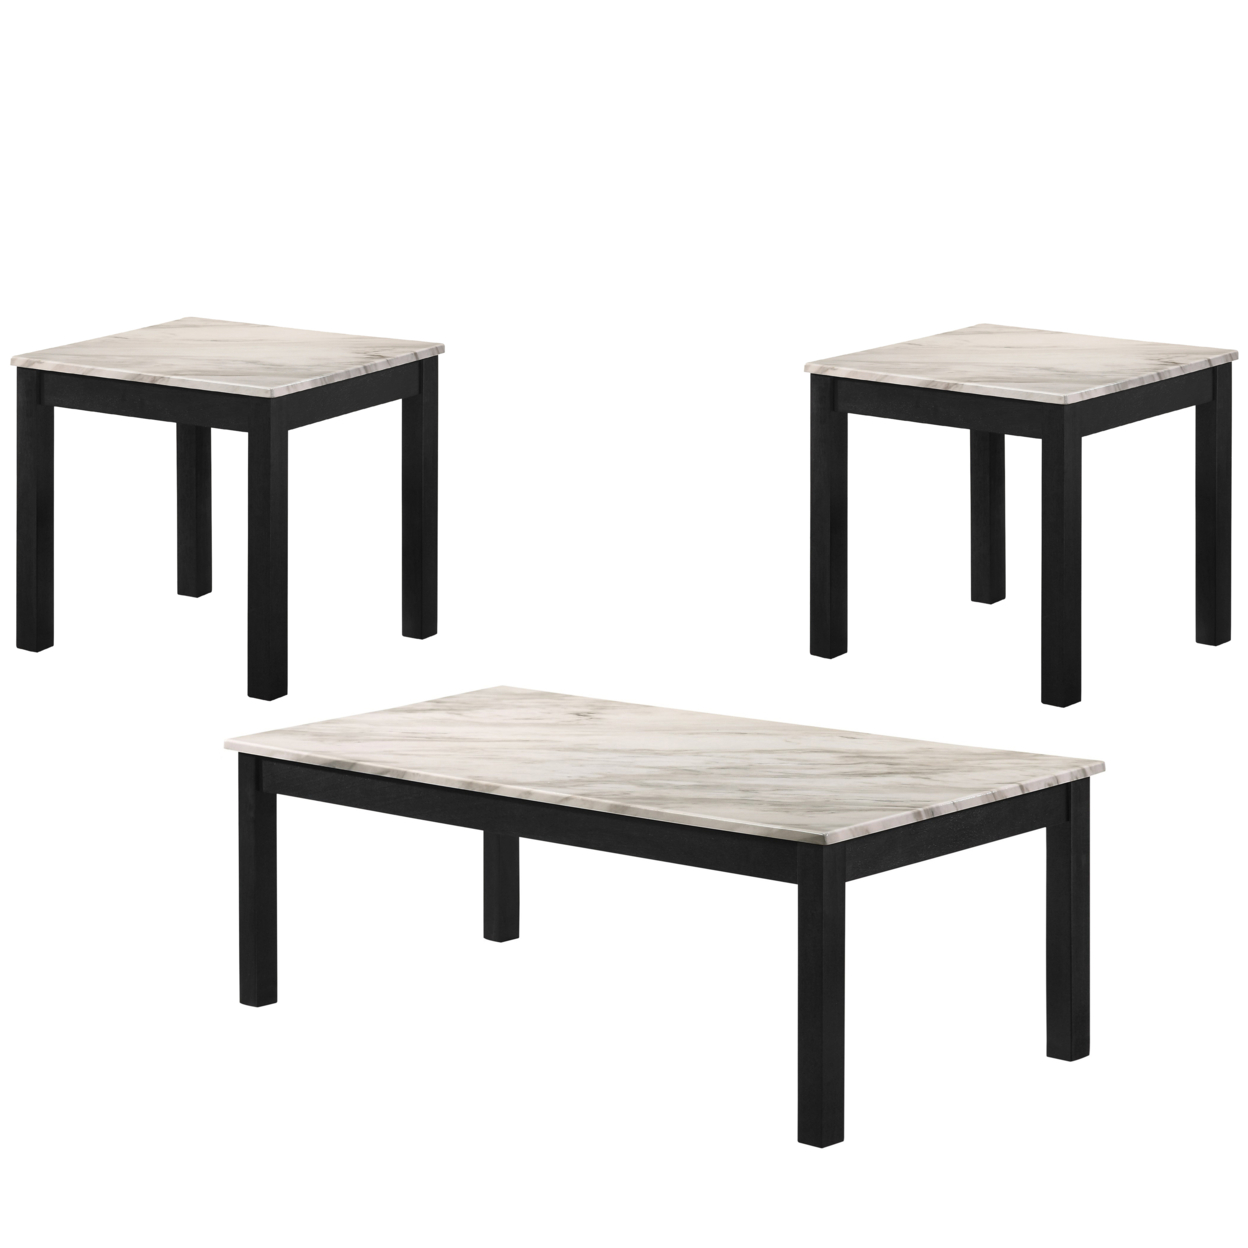 3 Piece Faux Marble Cocktail And End Table With Block Legs, White And Black- Saltoro Sherpi